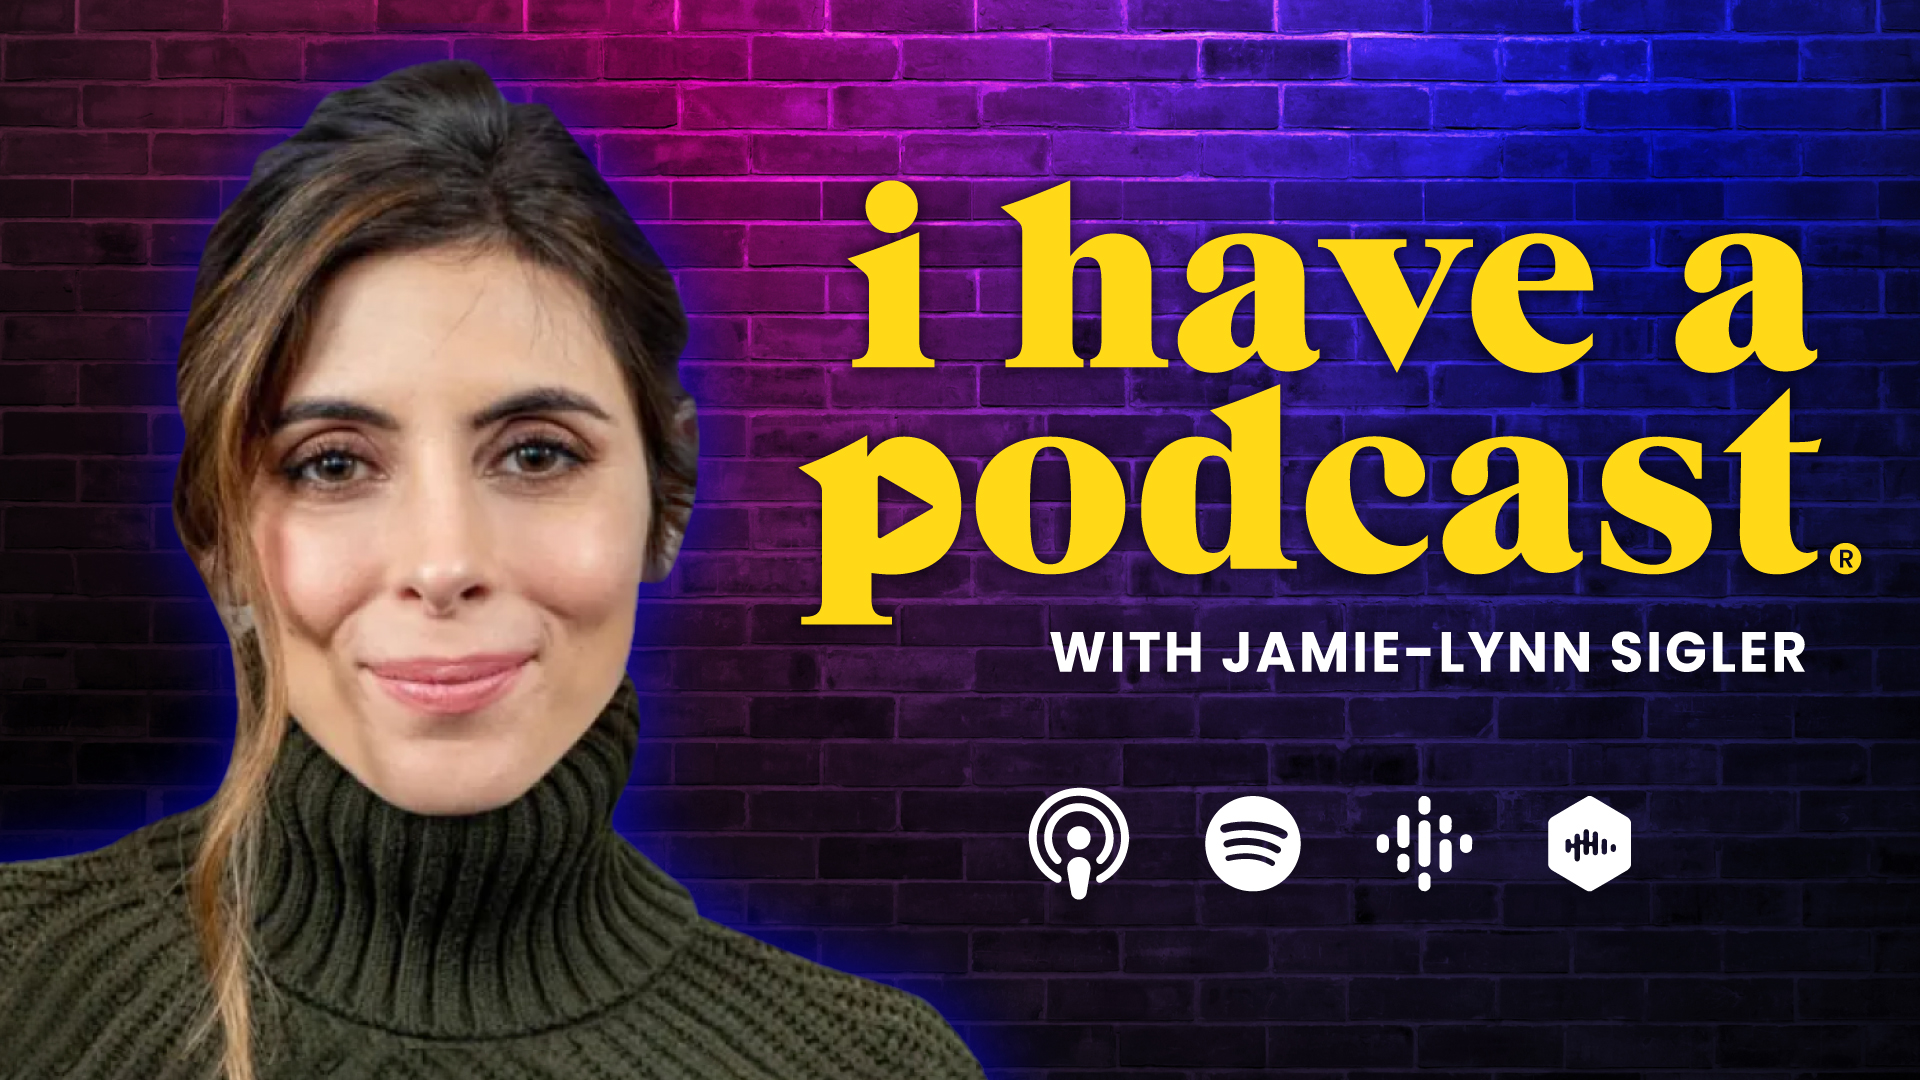 Jamie-Lynn Sigler and Launching a Podcast - I Have A Podcast